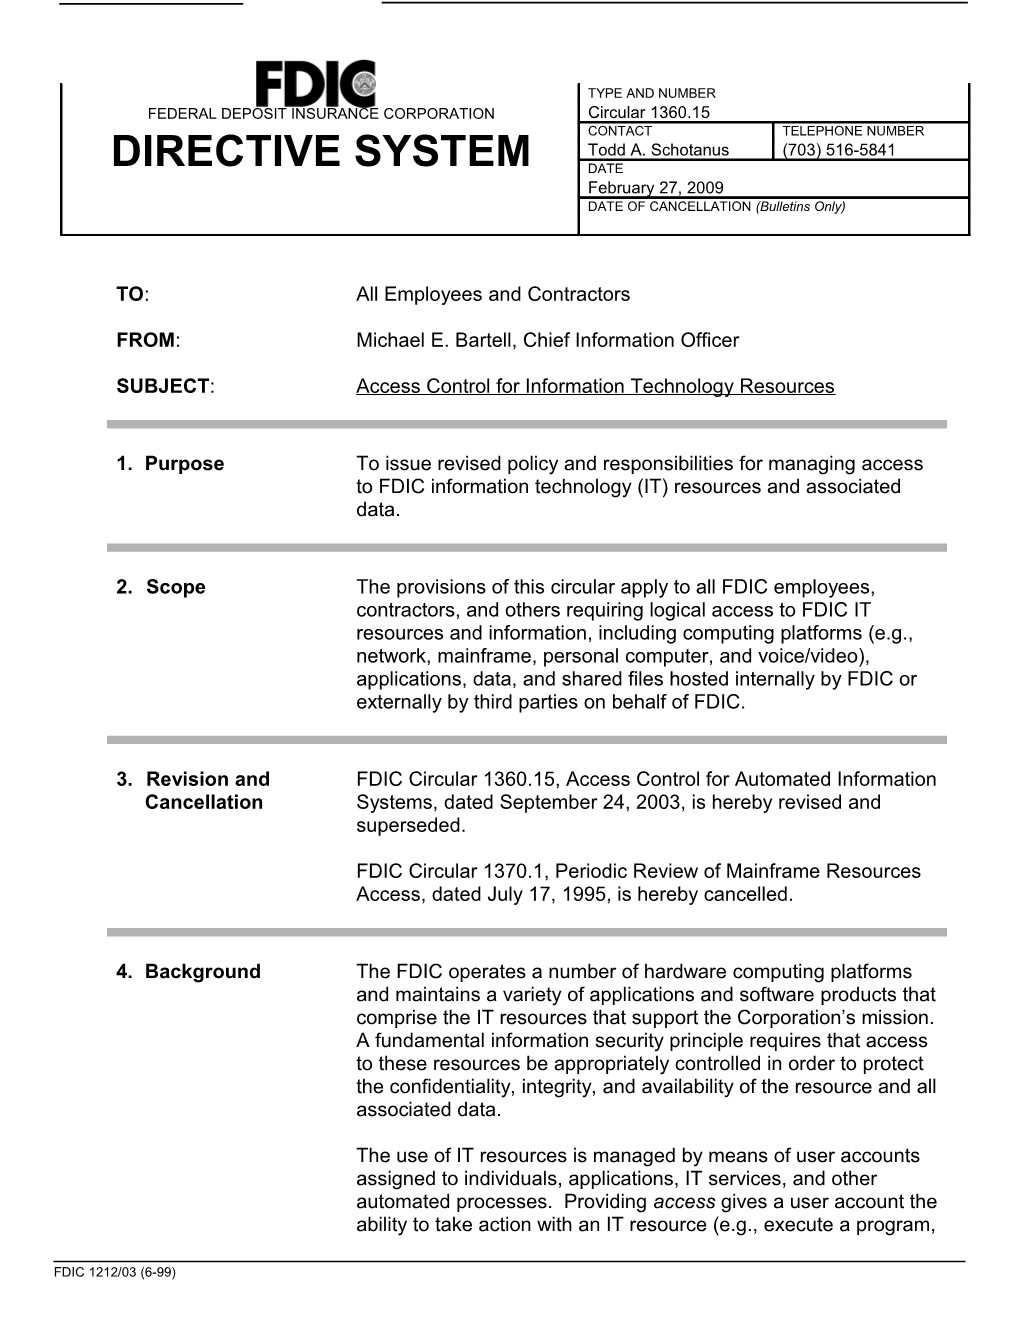 Circular 1360.15, Access Control for Information Technology Resources